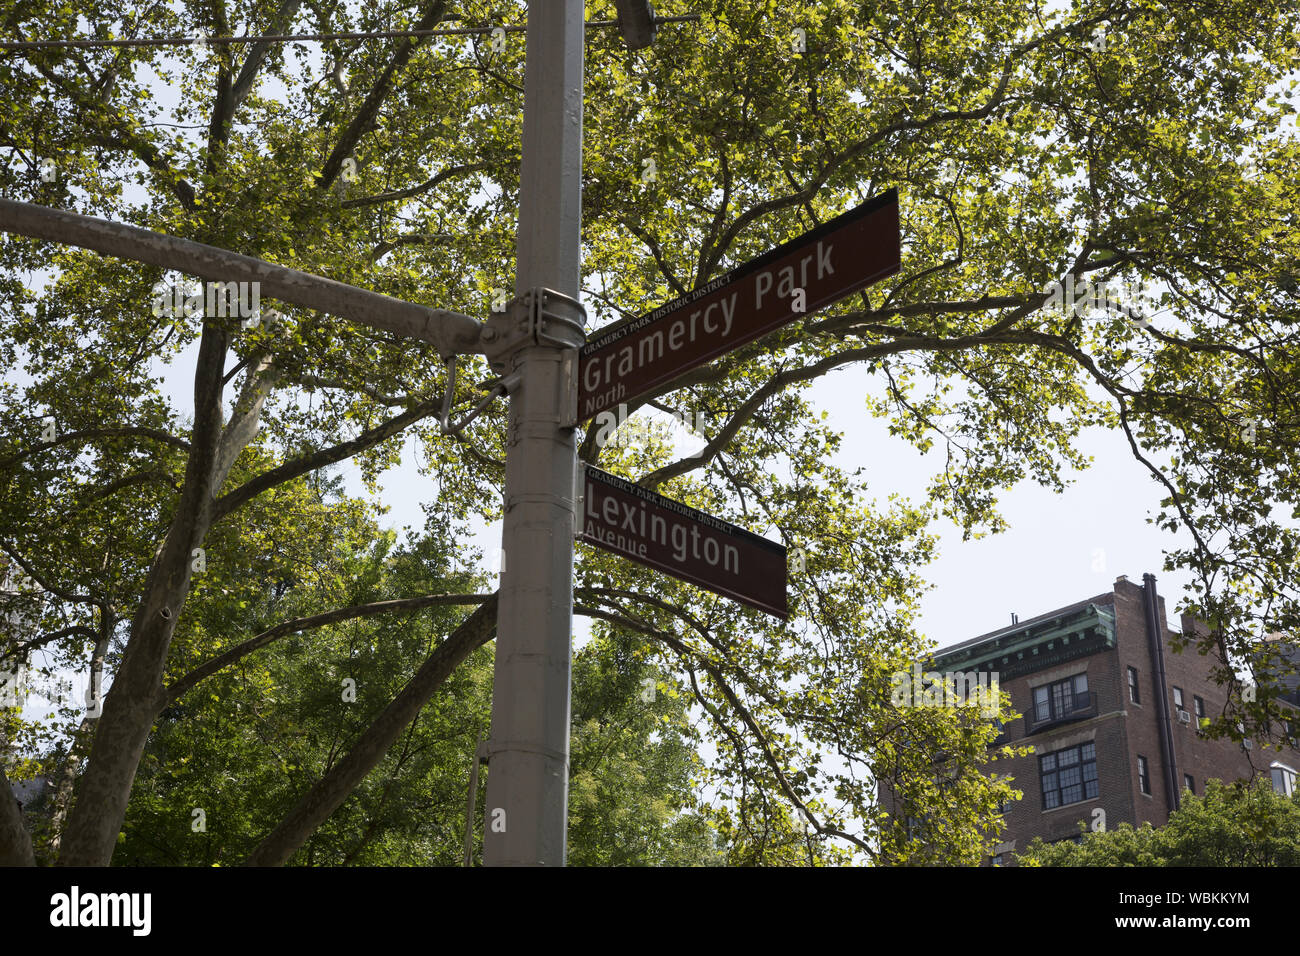 Street signs at Gramercy Park and Lexington Avenue in Manhattan. Stock Photo